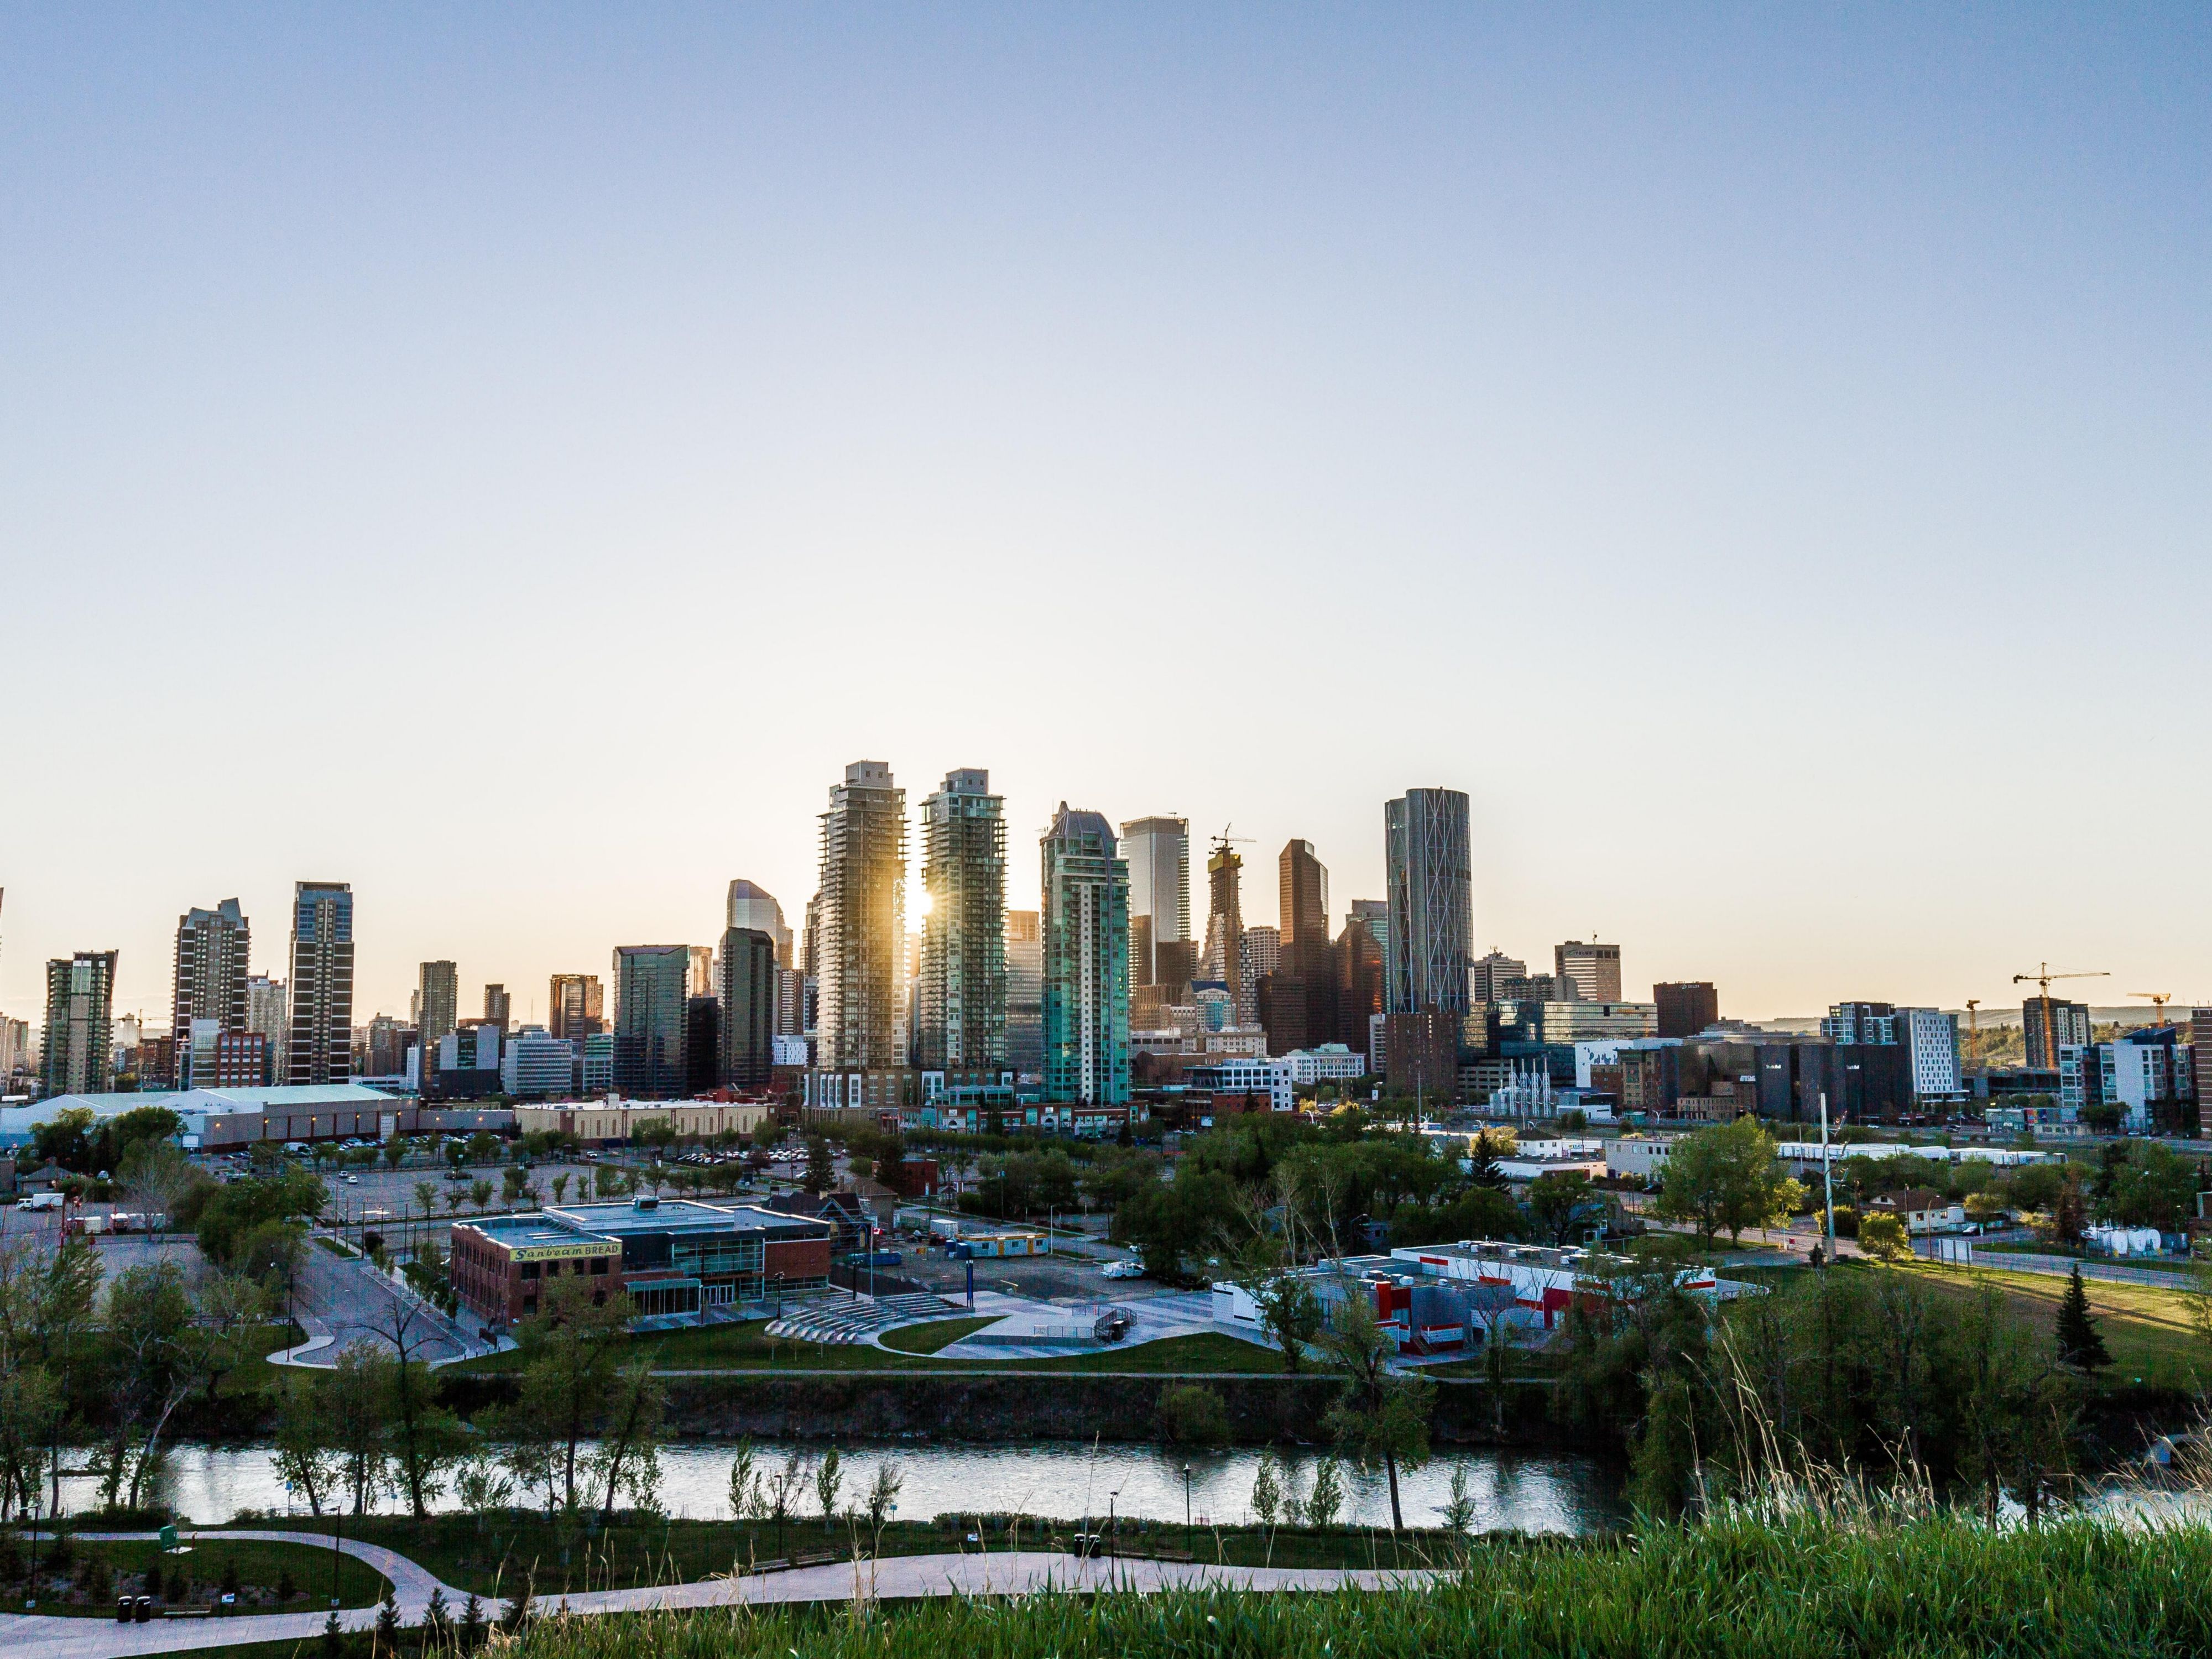 We have created a list of our favorite attractions to visit in Calgary. Enjoy a range of offers and flexible cancellation.